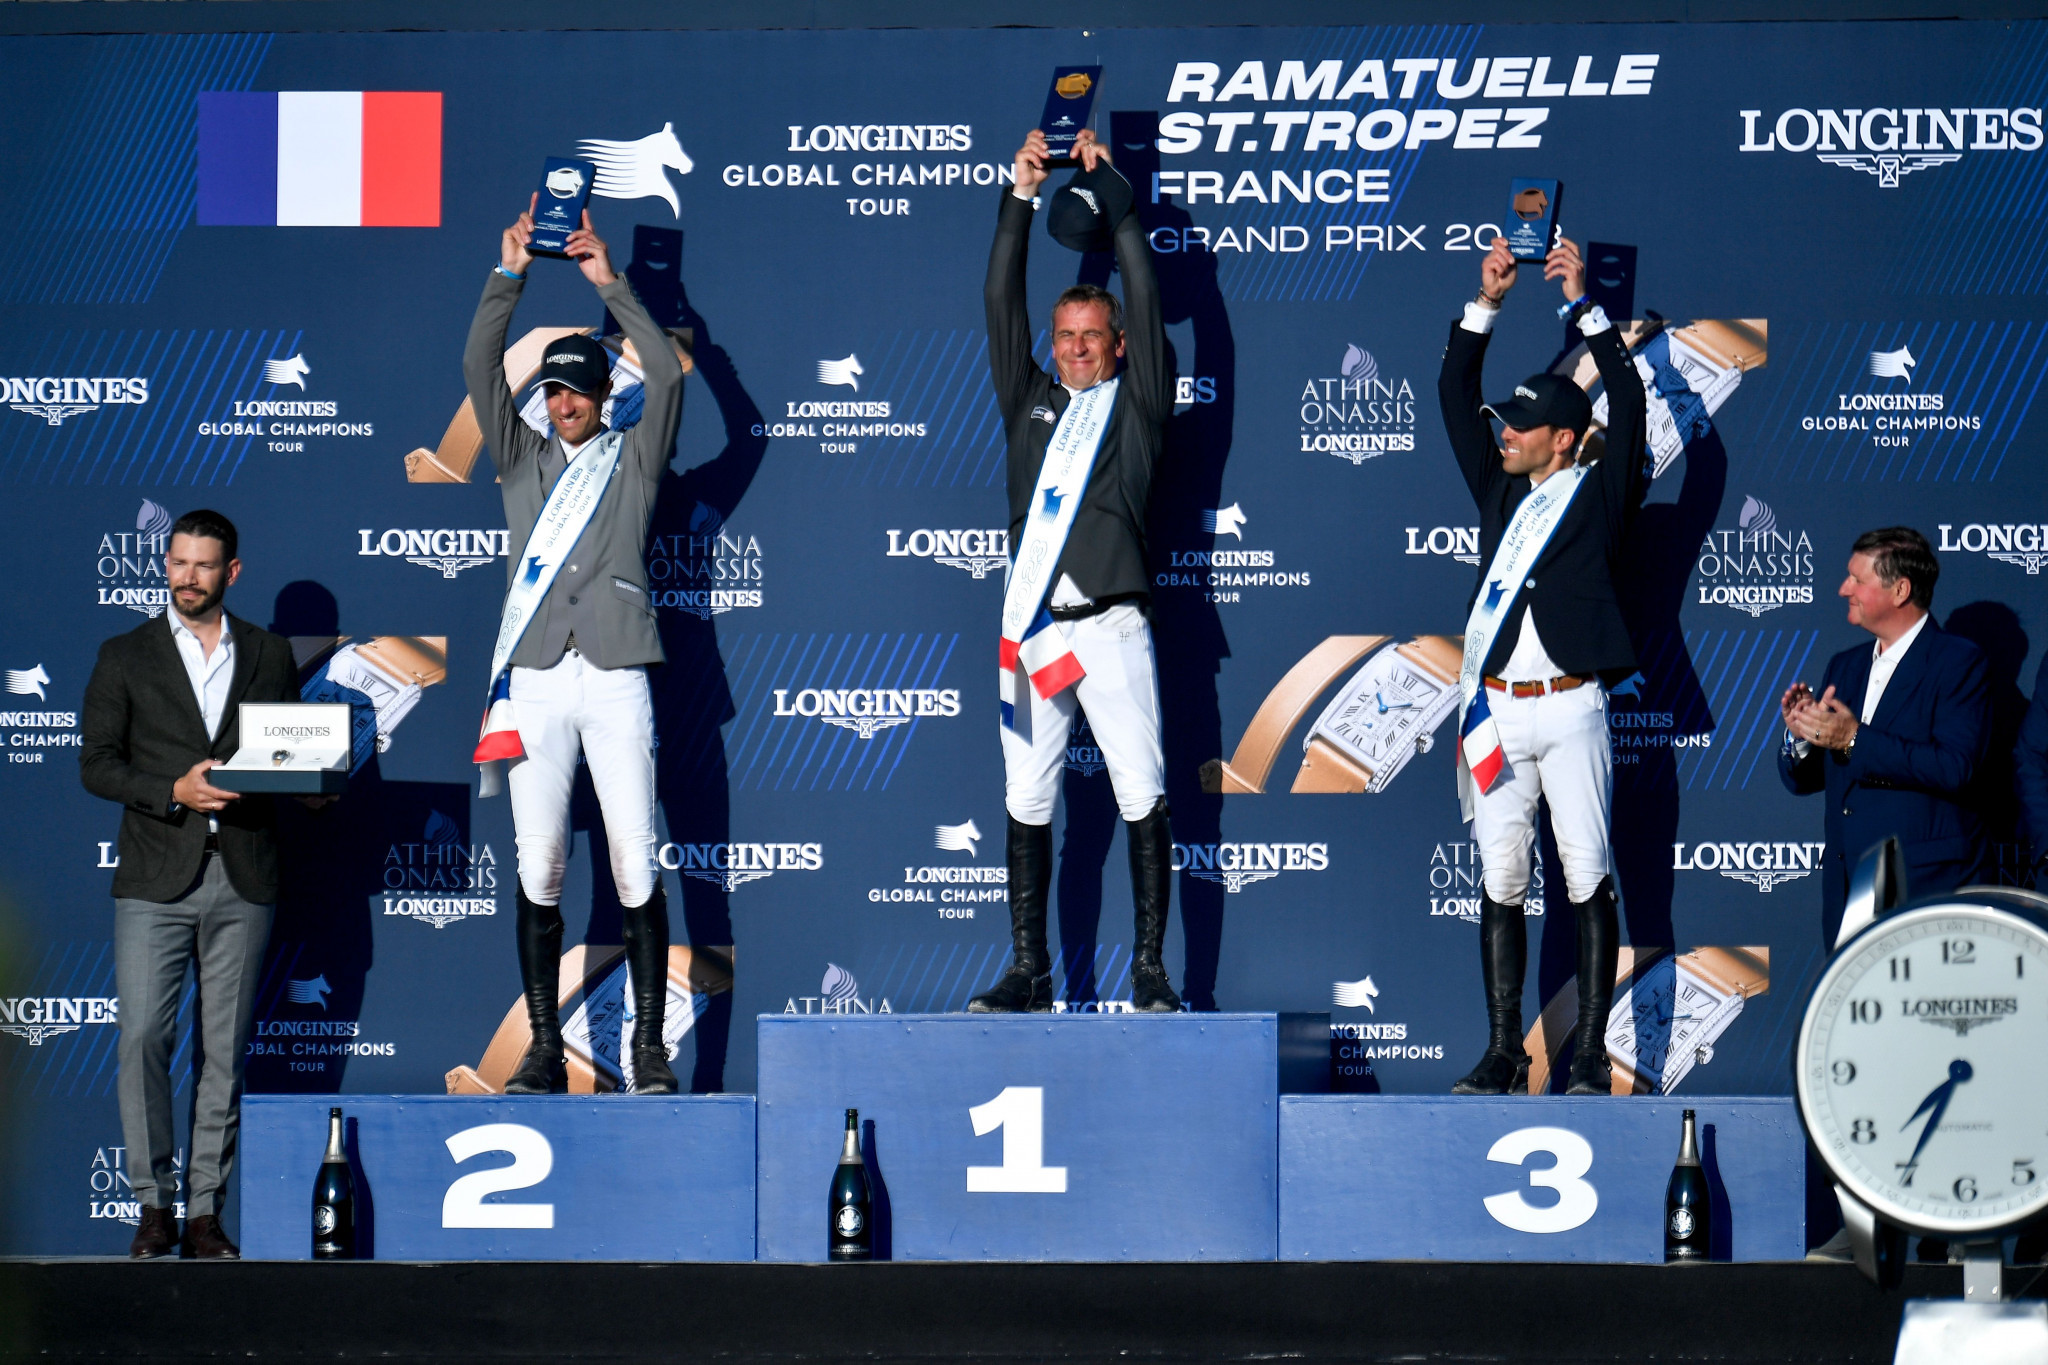 The podium for the Global Champions Tour event in St Tropez, which went to a six way jump-off ©Longines Global Champions Tour